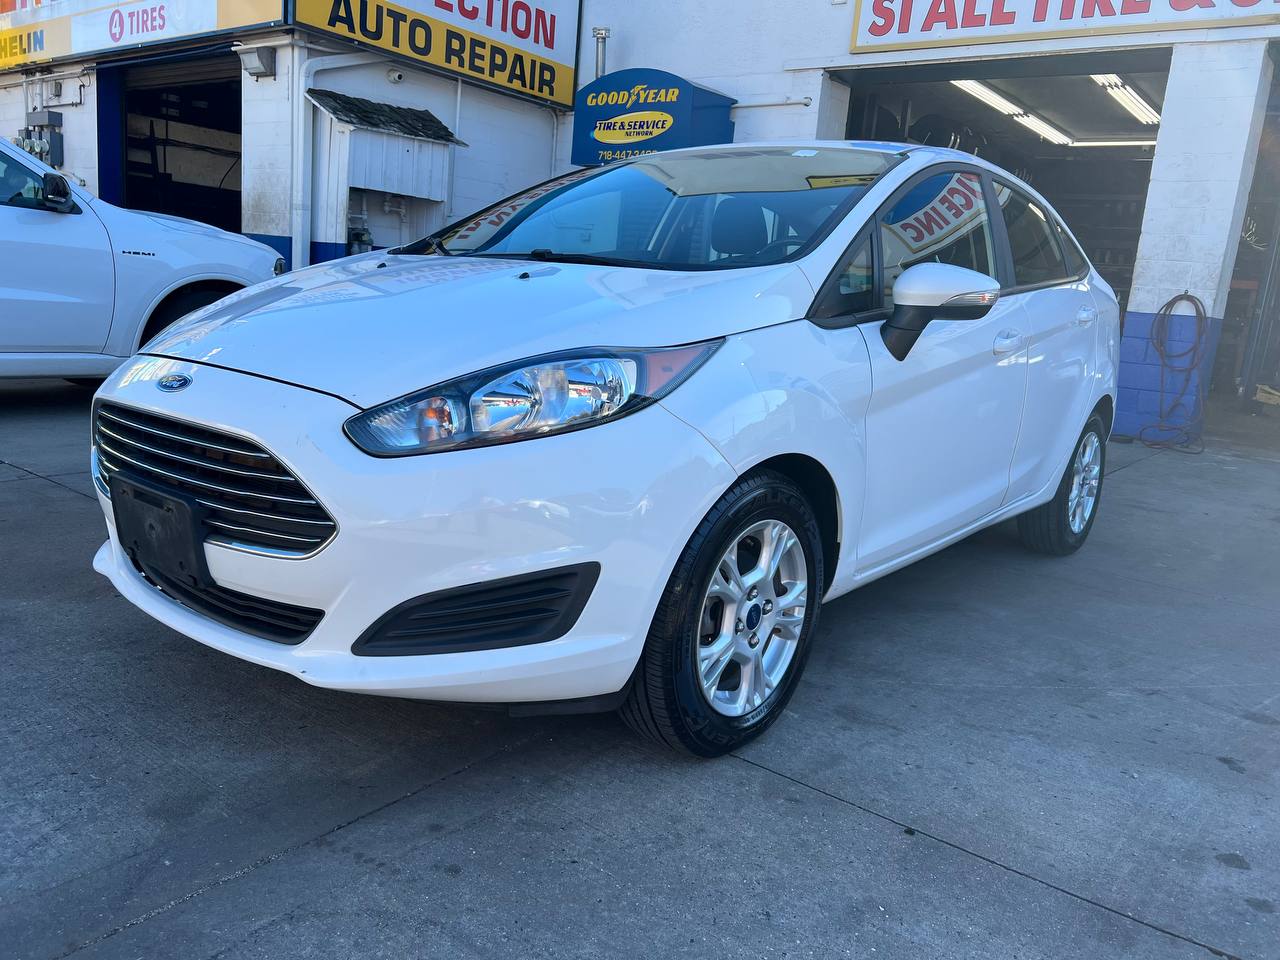 Used Car - 2016 Ford Fiesta SE for Sale in Staten Island, NY